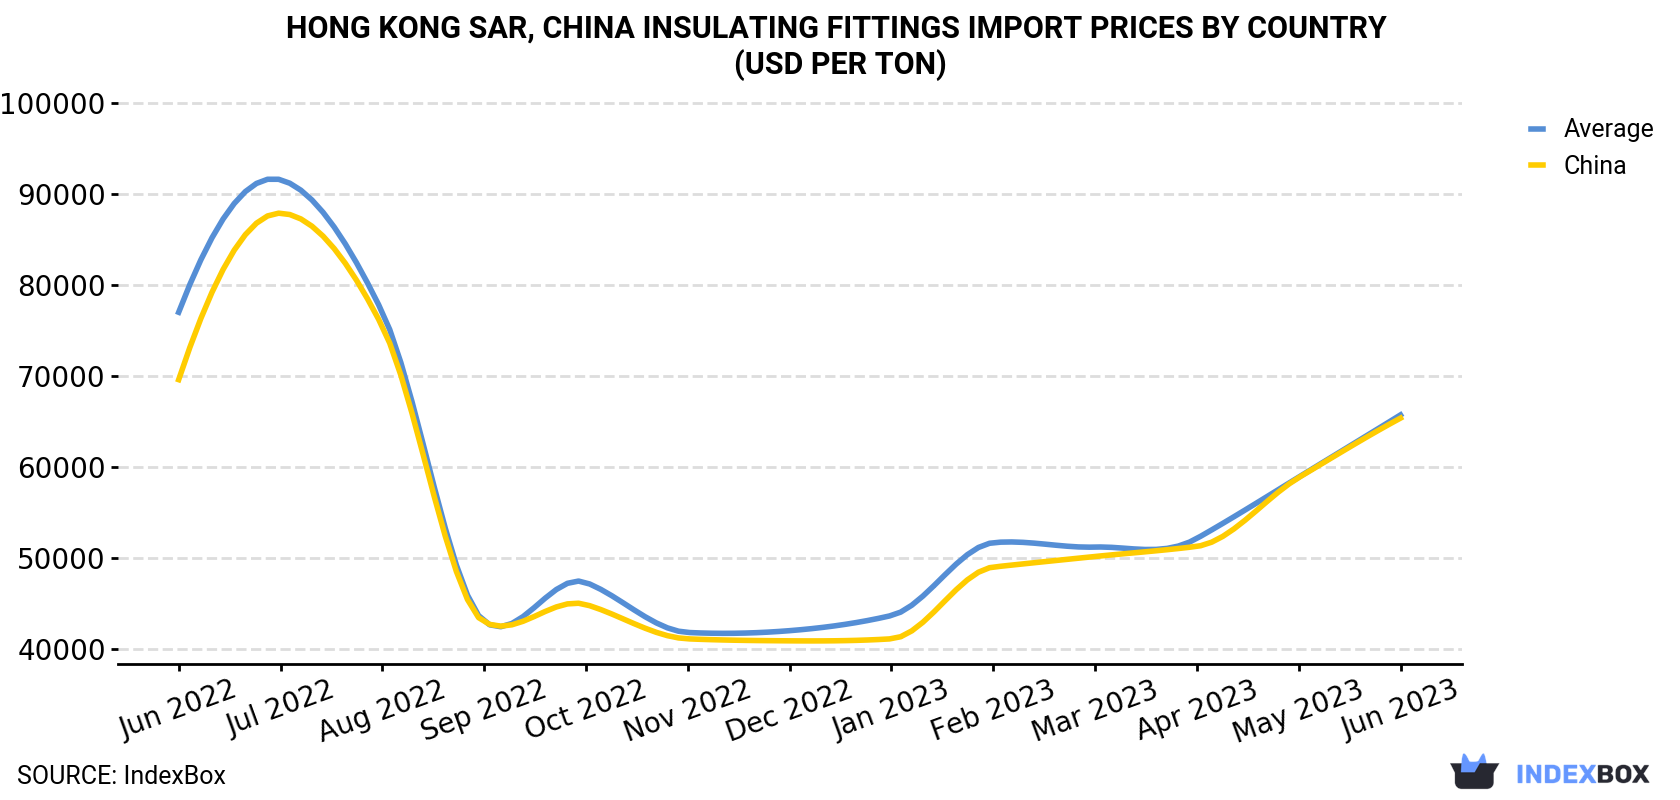 Hong Kong Insulating Fittings Import Prices By Country (USD Per Ton)